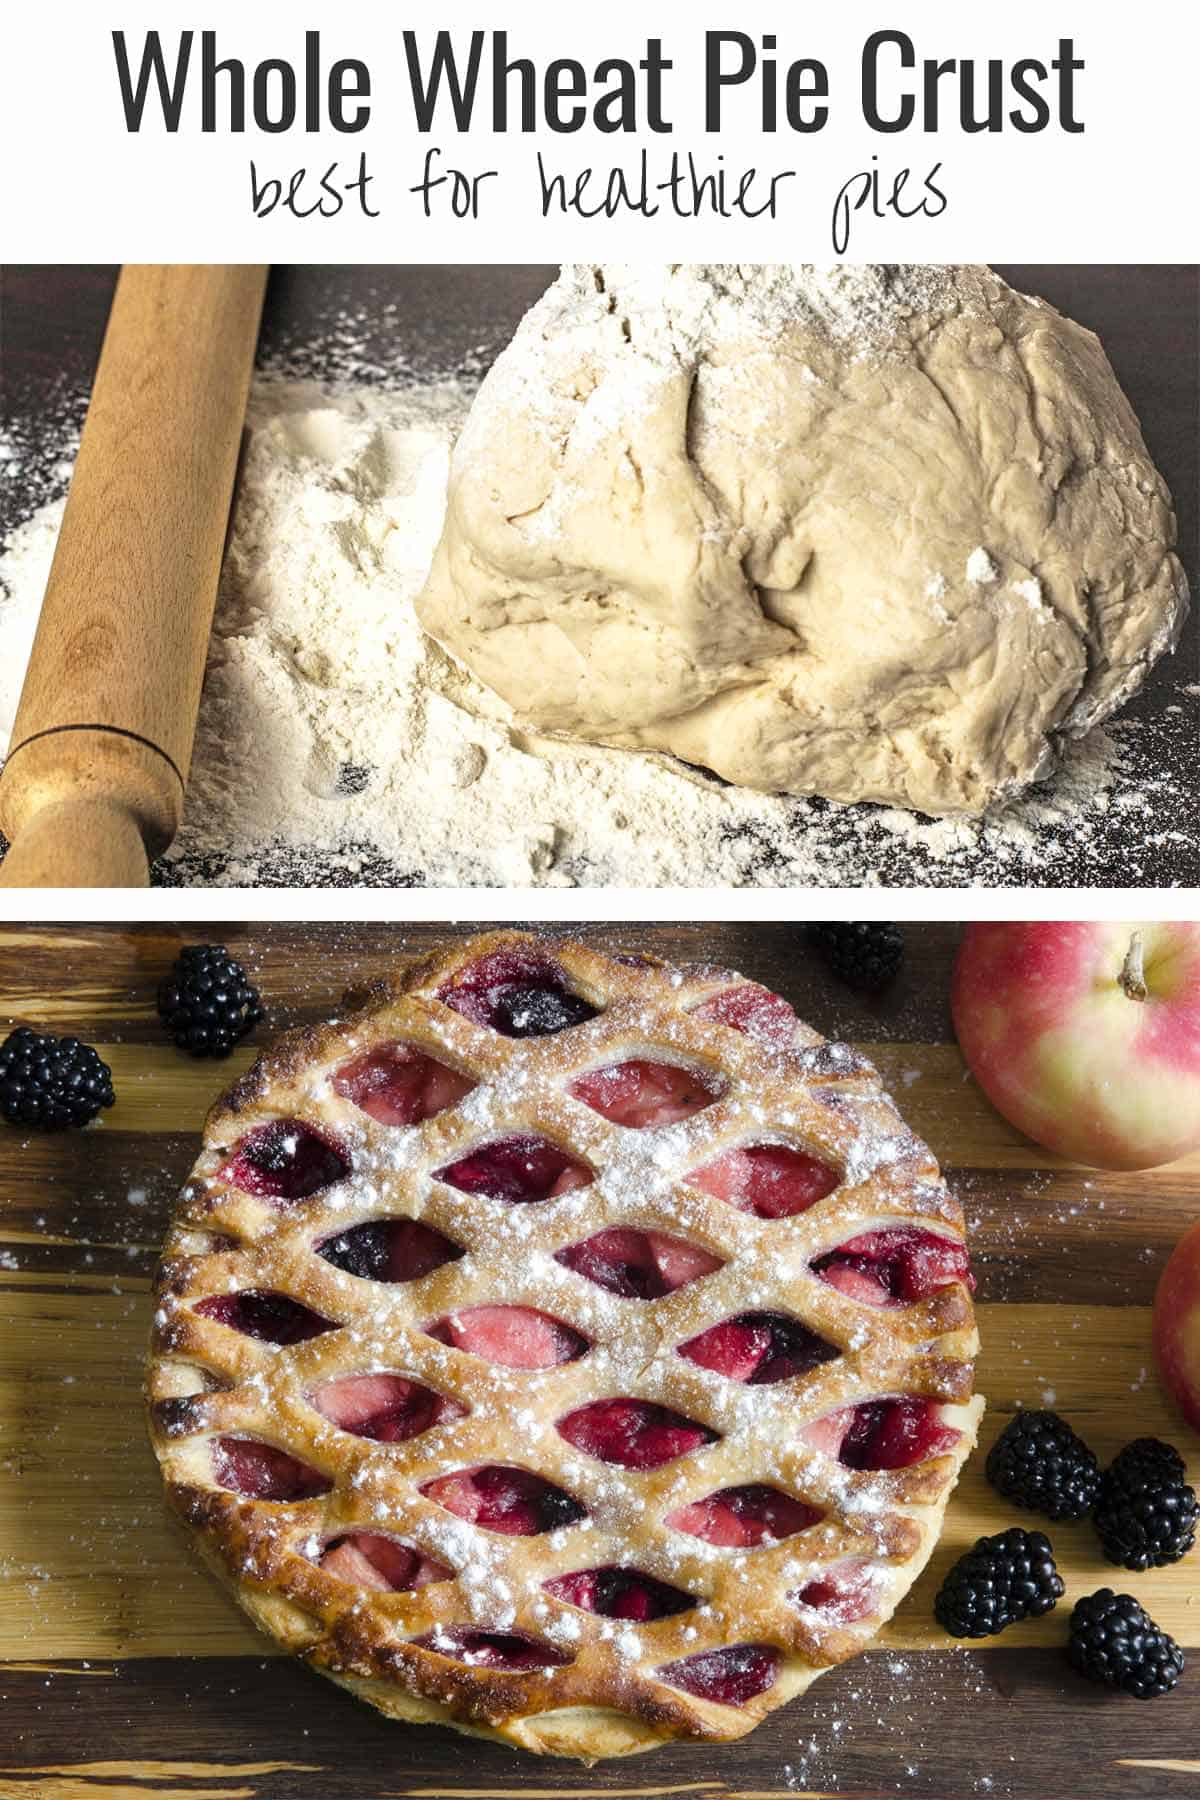 Ball of wheat flour dough and rolling pin and a baked mixed berry pie with whole wheat flour.